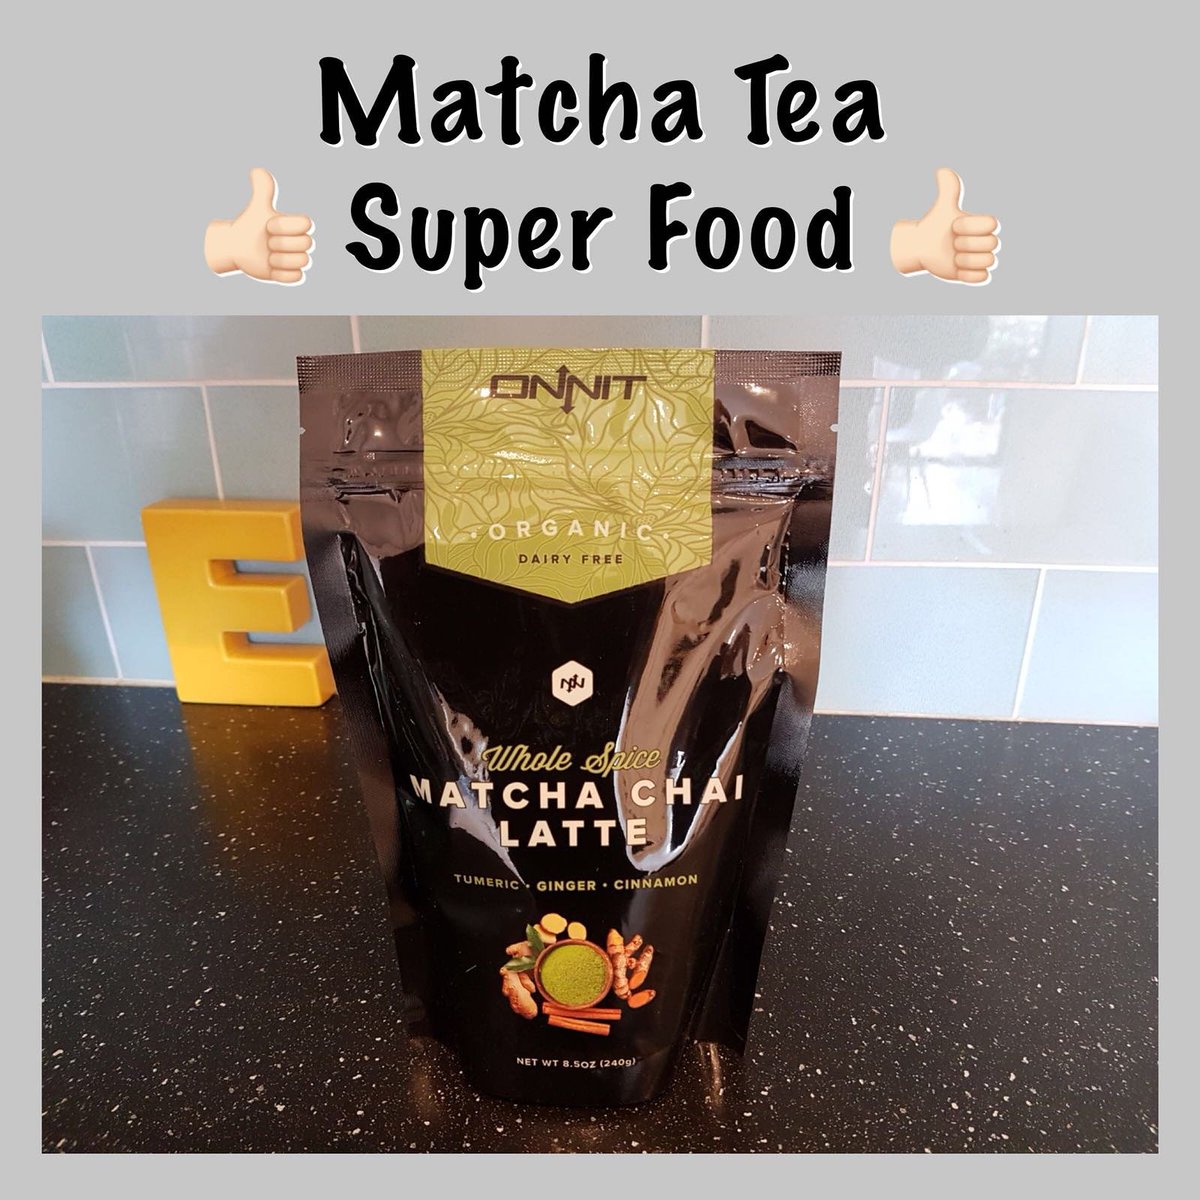 @Onnit 's machta tea is so good and machta tea as a super food is an understatement 💪🏻👌🏻 #Healthyeating #healthyeatinghabits #healthyeatingtips #healthyeatingideas #healthyeatingmadeeasy #healthyeatinglifestyle #healthyeatings #Healthyeatingbetterlife #healthyeatingalways